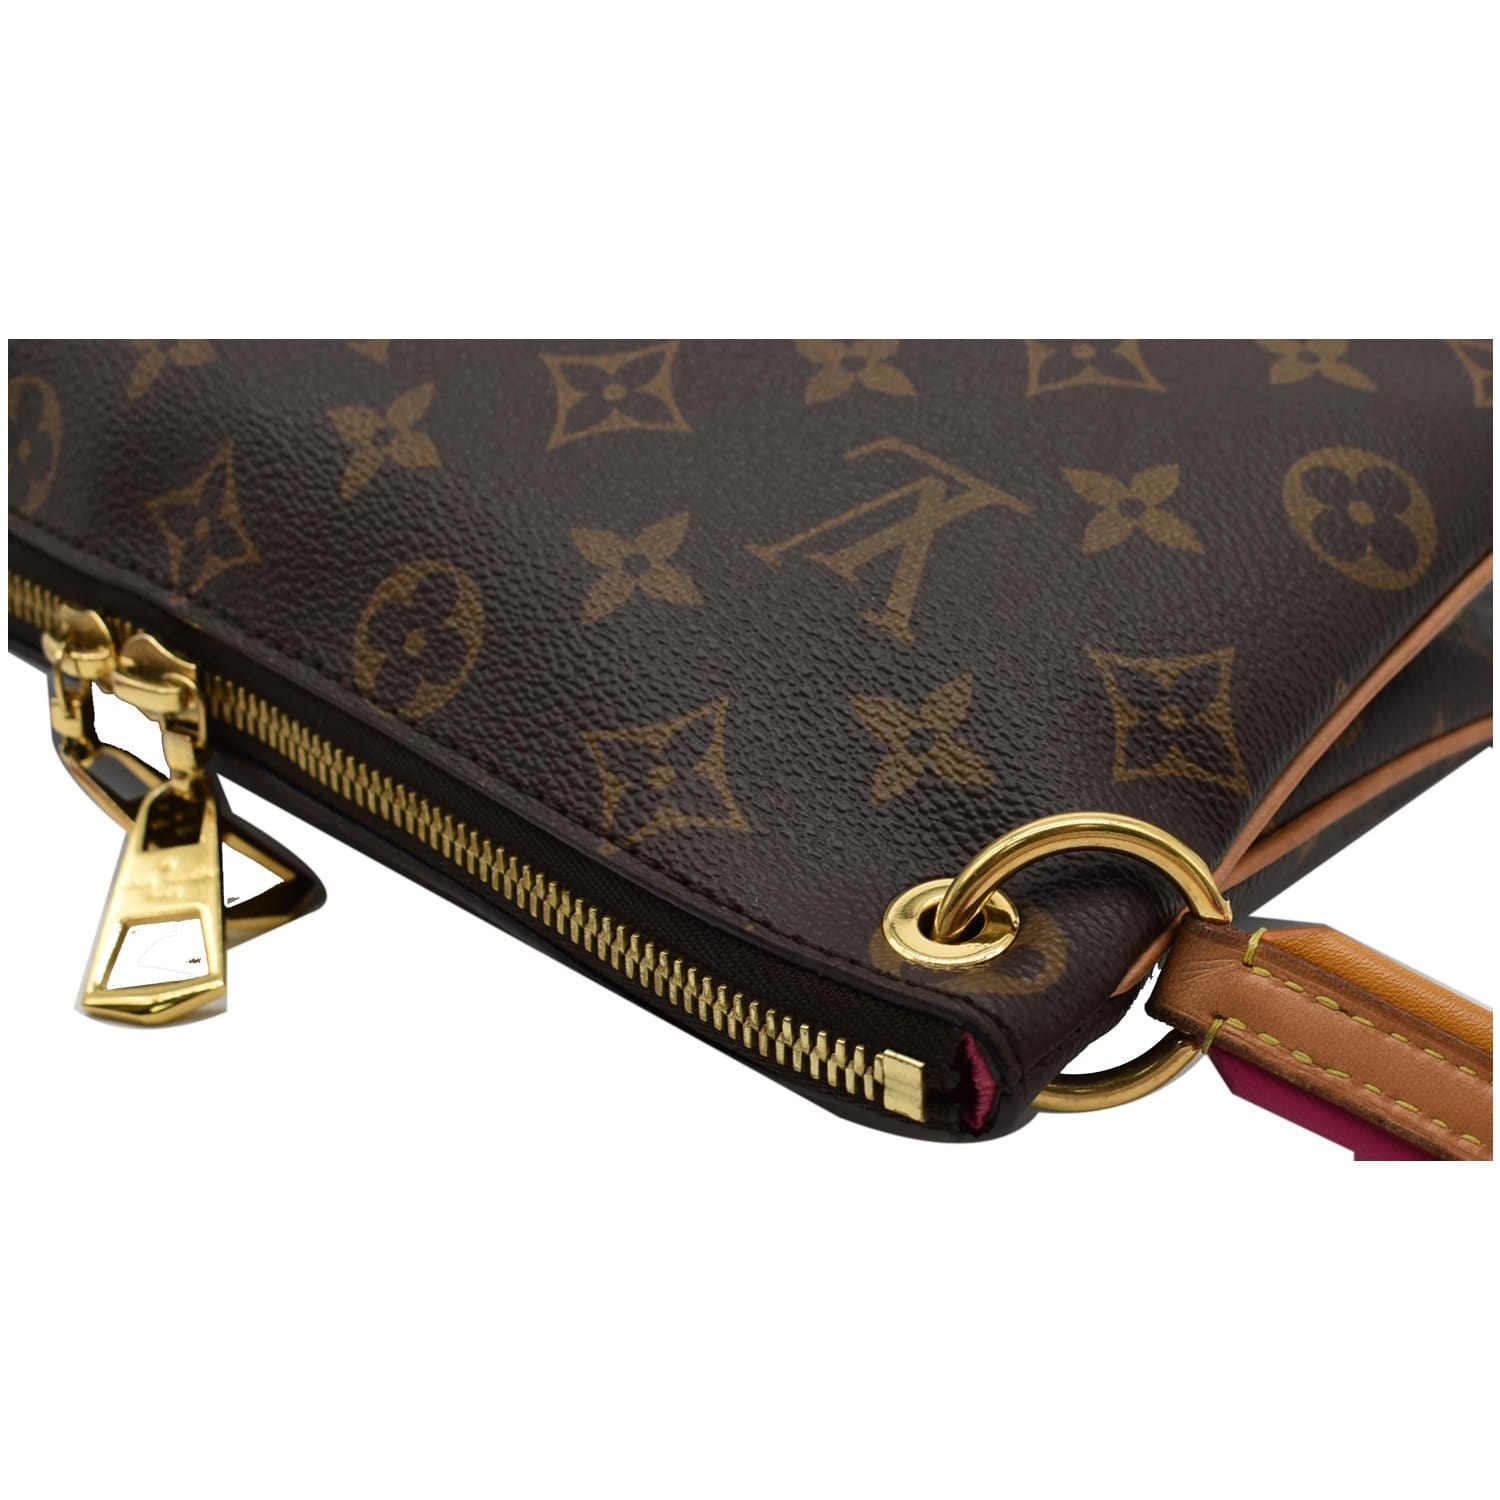 Louis Vuitton Lorette Monogram Bag US$ 971 Explore the full catalogue of  bags, clothes, jewelry and accessories at vinvoy.com (active link…